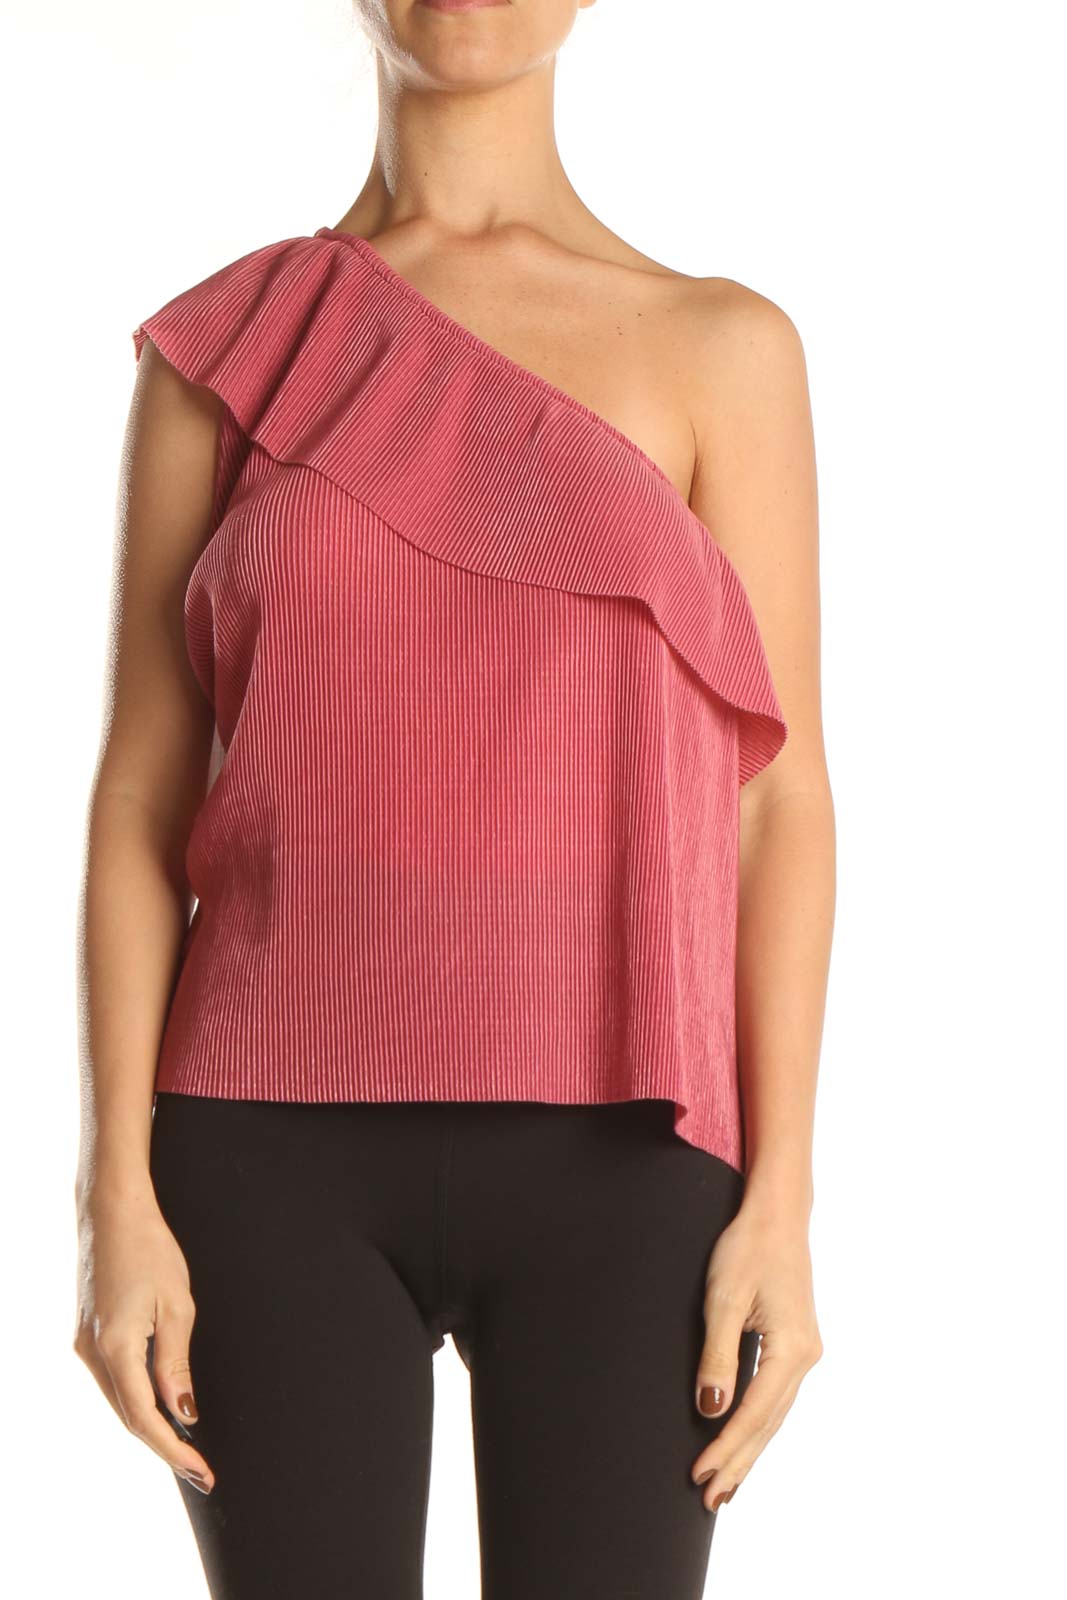 Pink Ribbed One Shoulder Chic Top Front